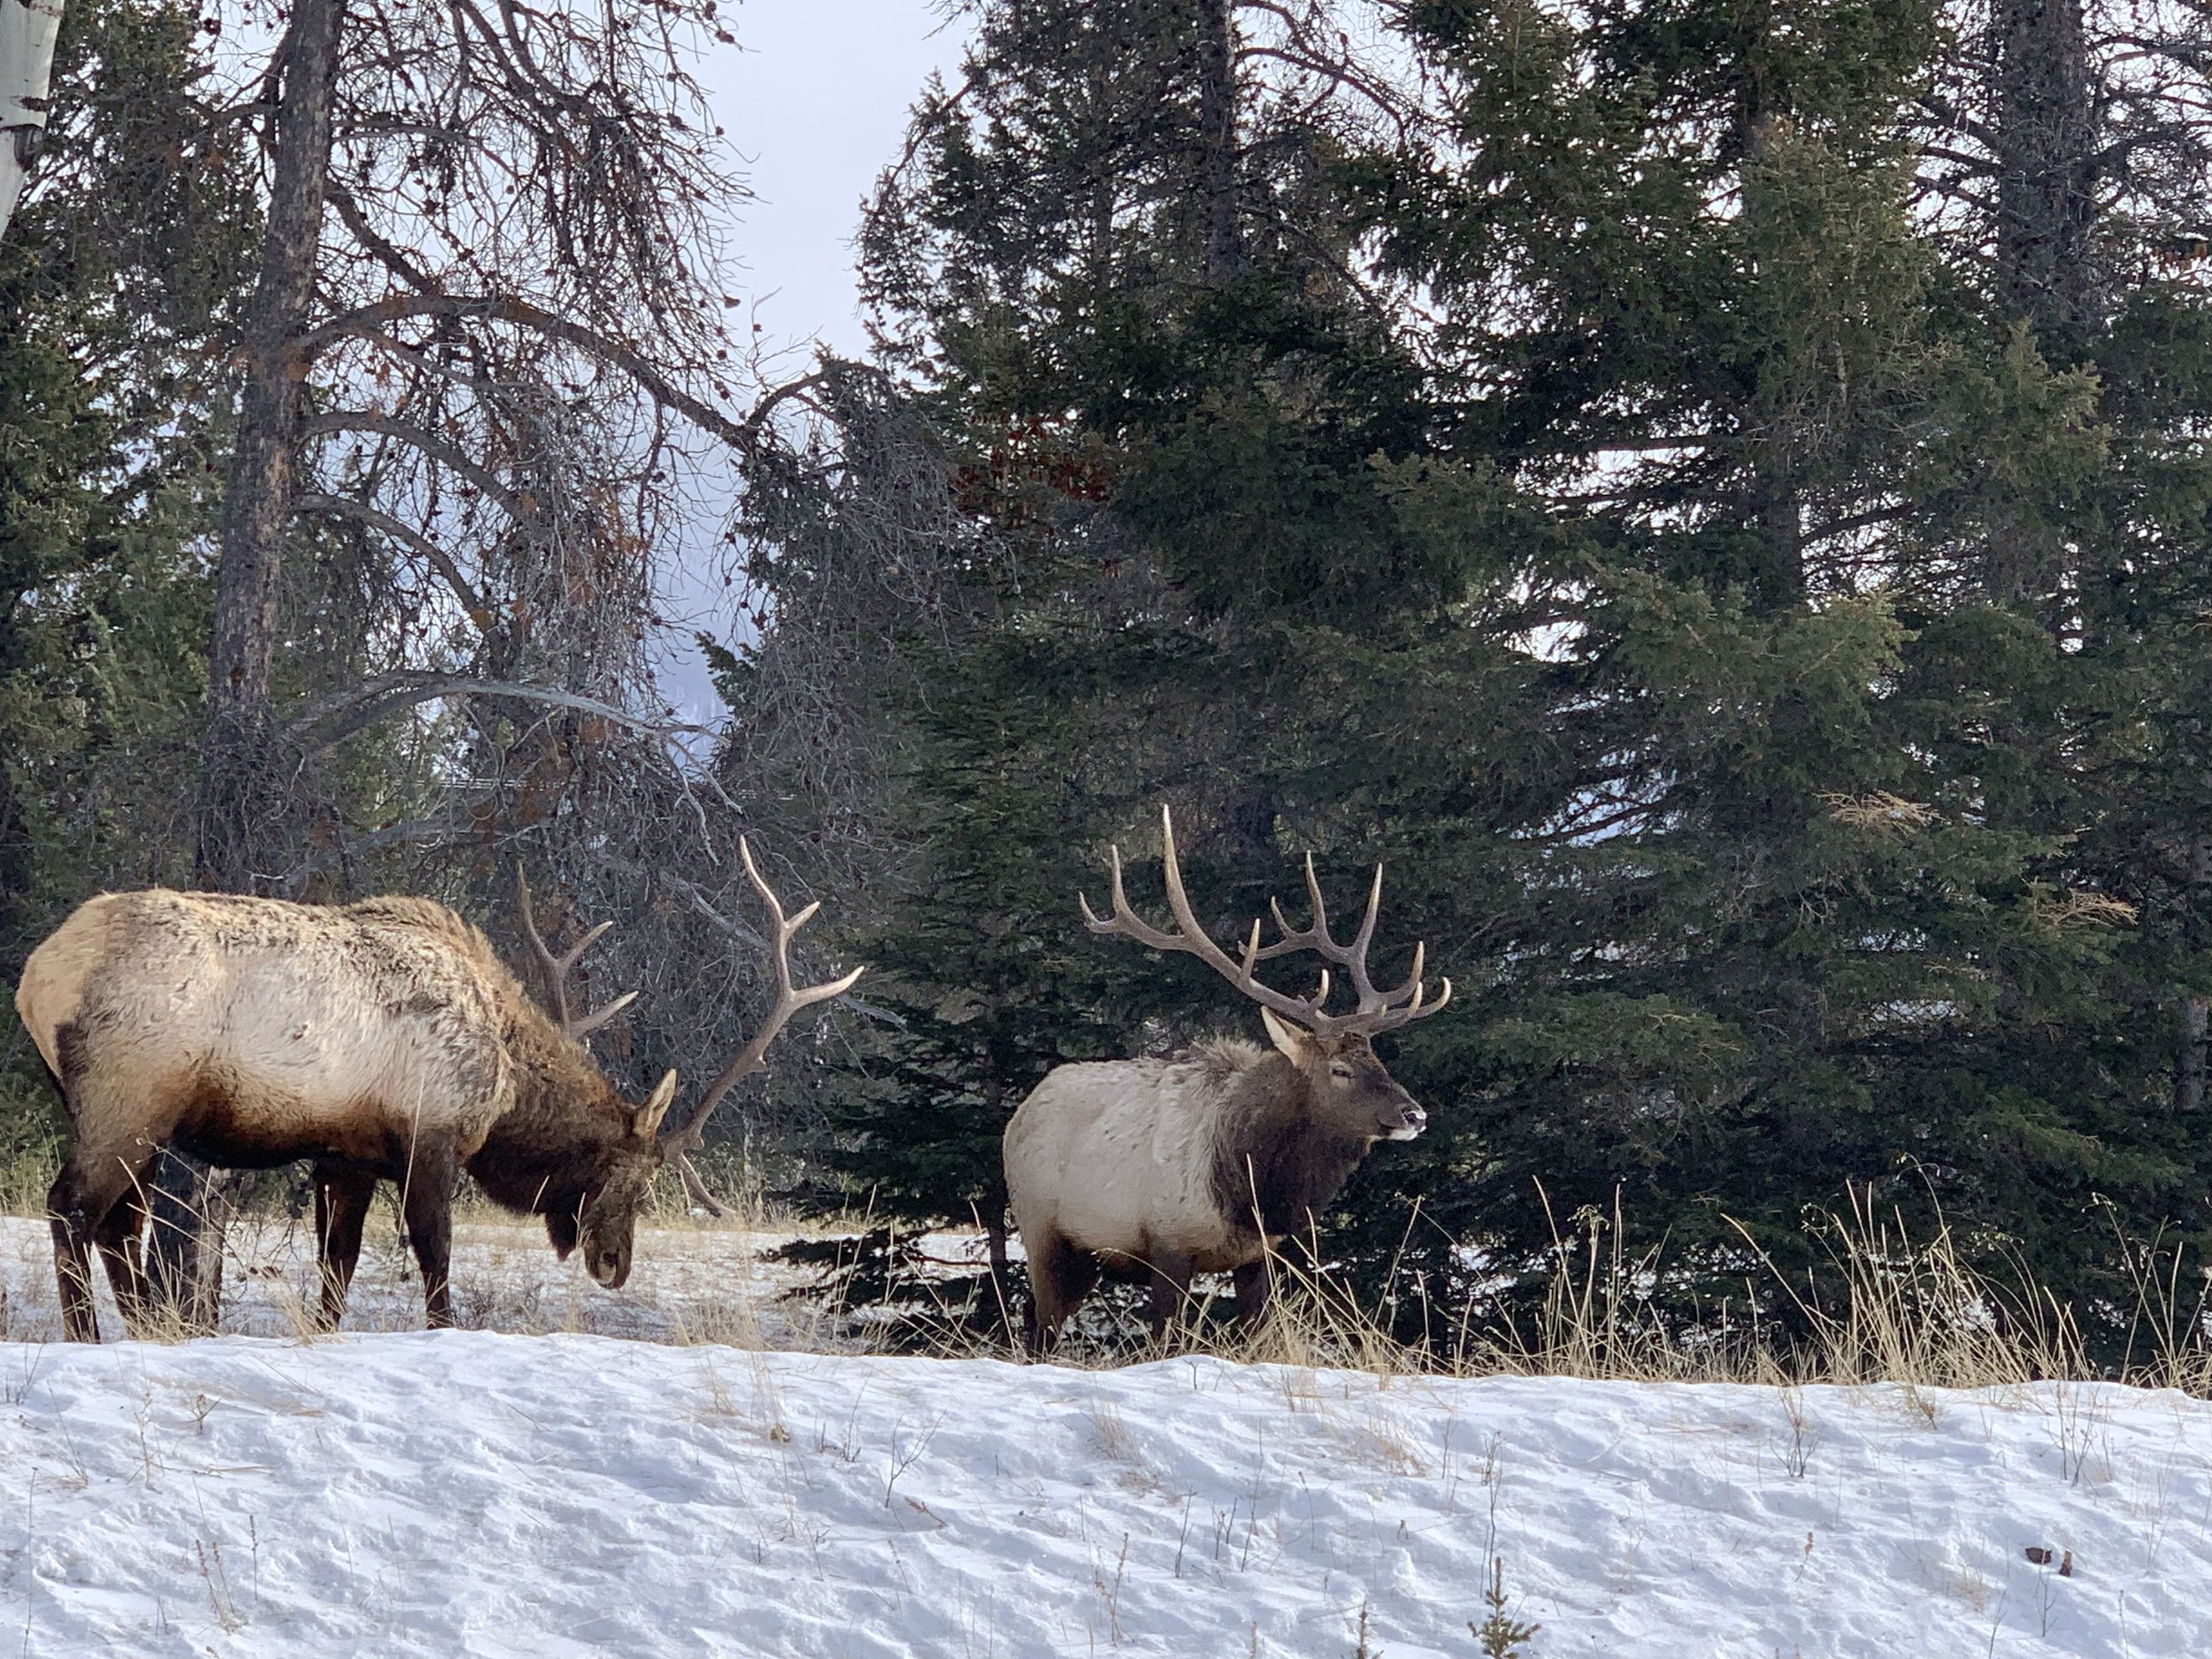 Elk on the drive to the canyon